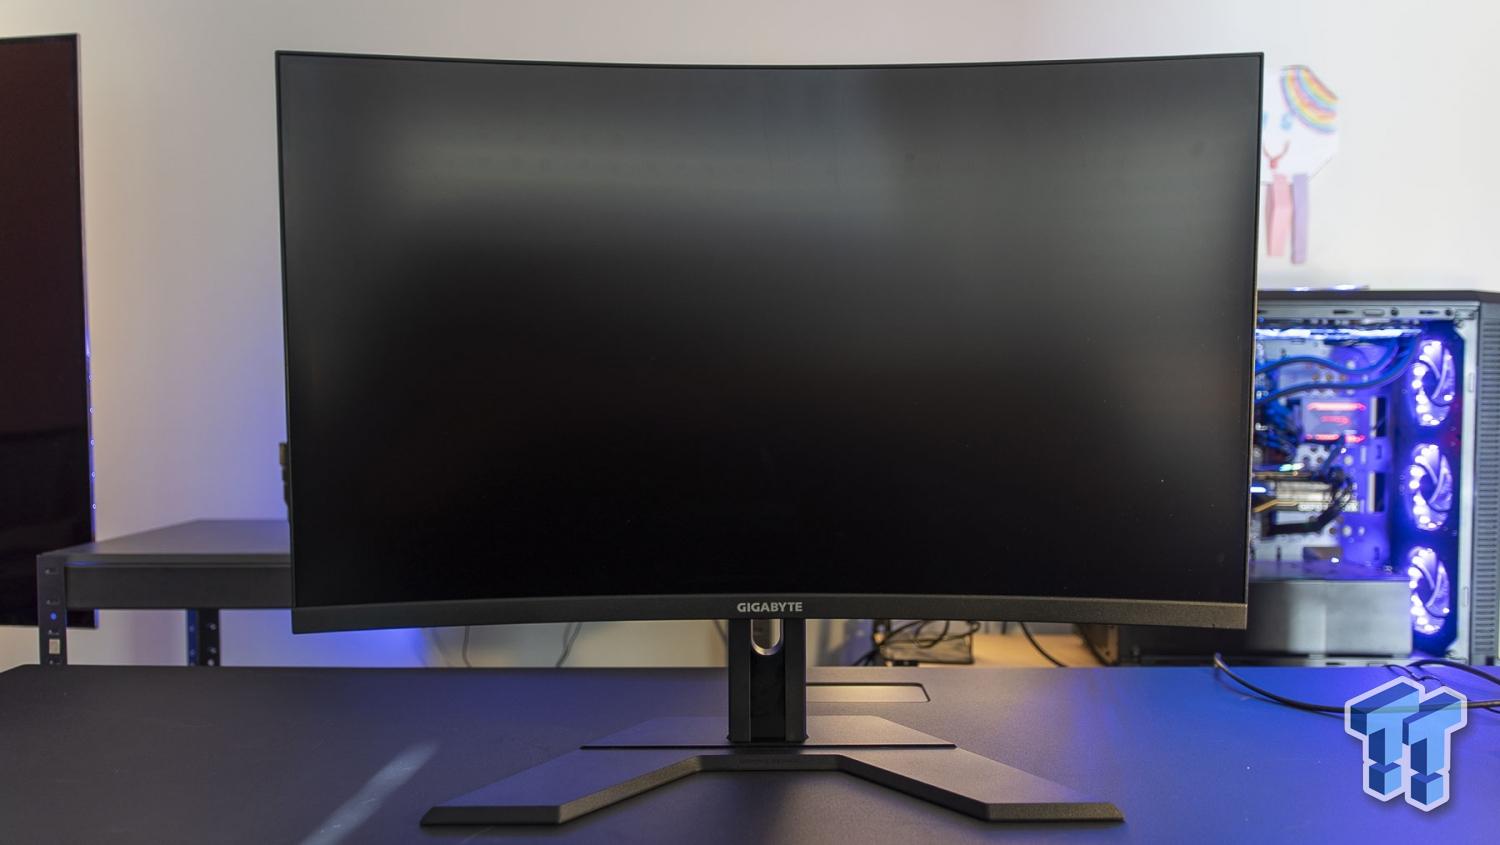 Review: 165Hz $400 under Gaming G32QC GIGABYTE Monitor for 1440p 32\